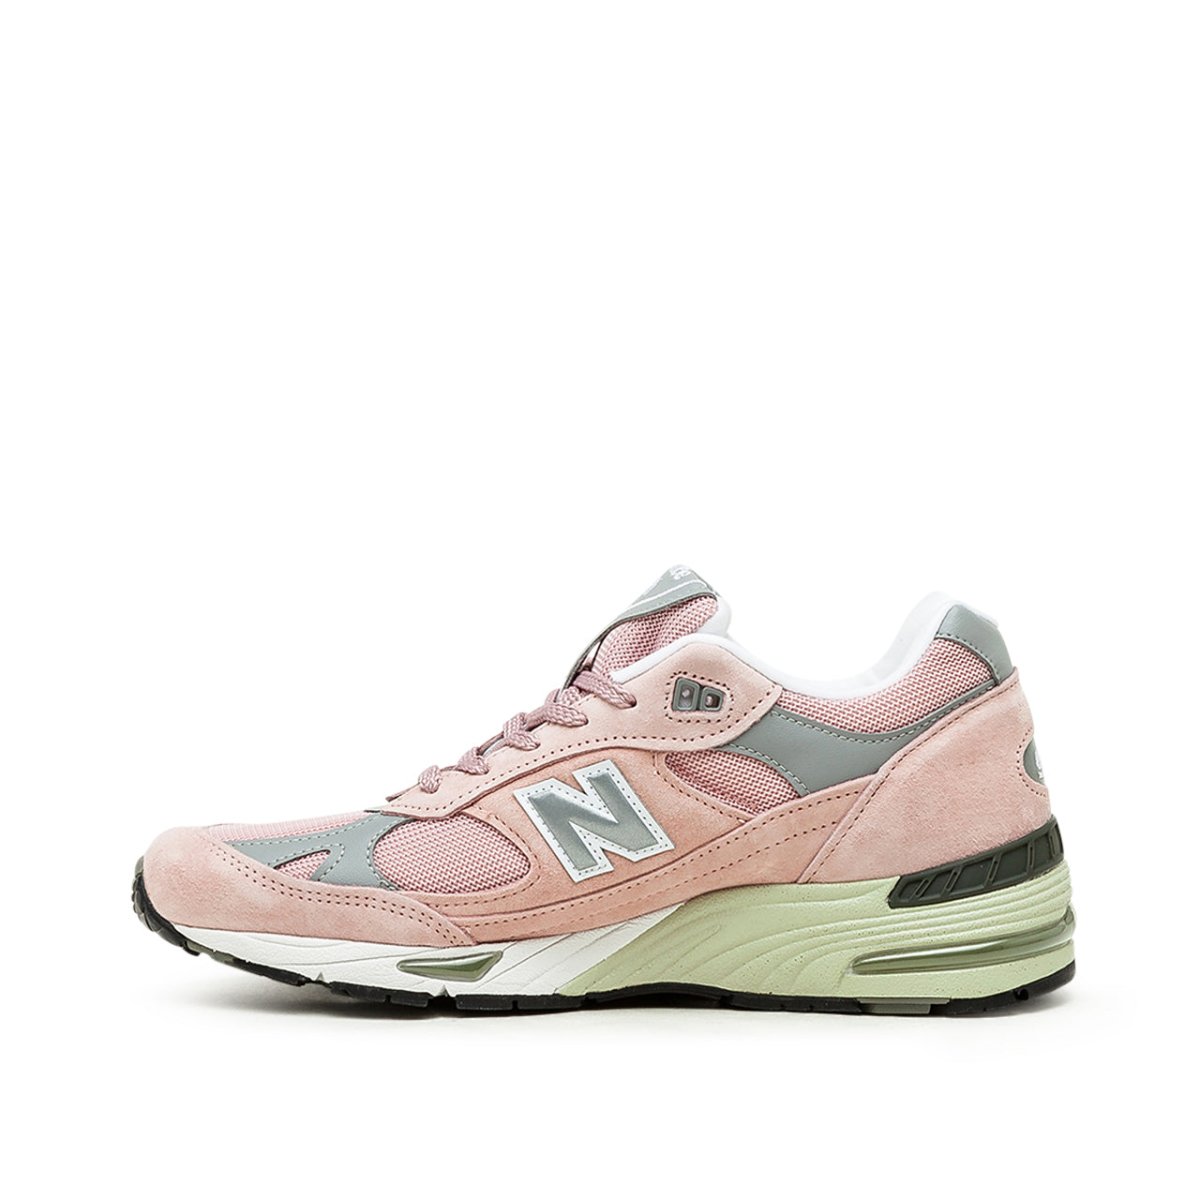 New Balance W991 PNK Core Pink 'Made in England' (Rosa)  - Allike Store